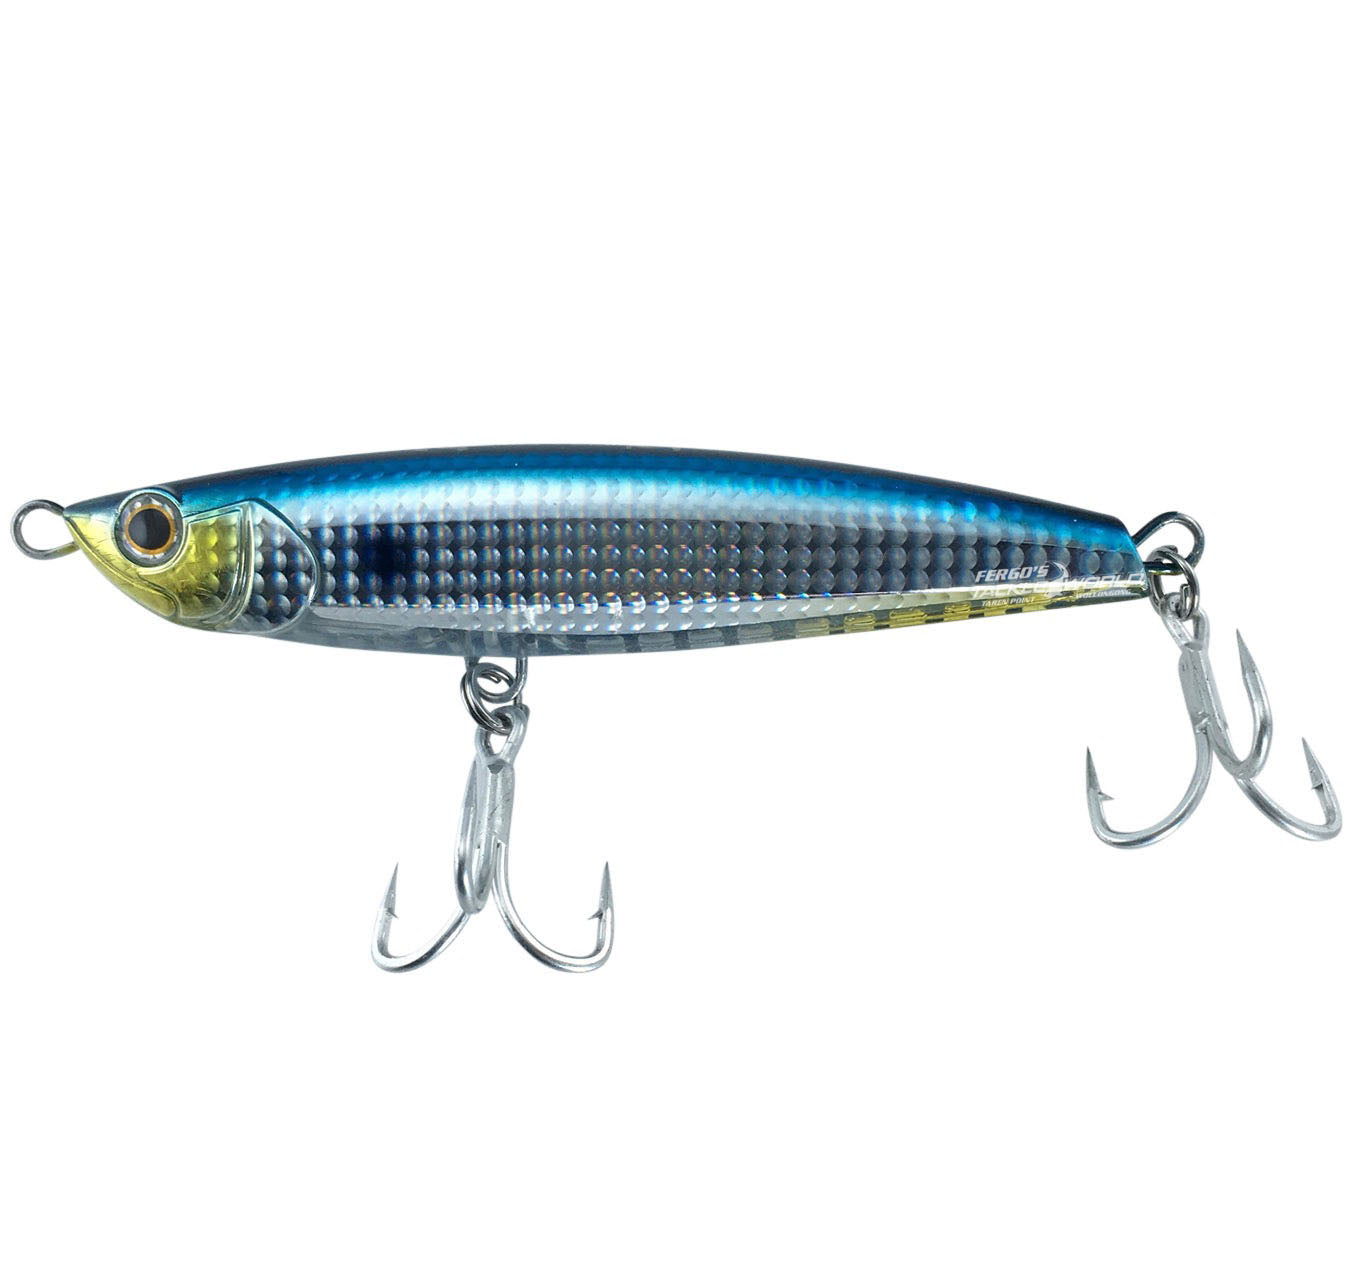 All Stickbait Lures - Fergo's Tackle World